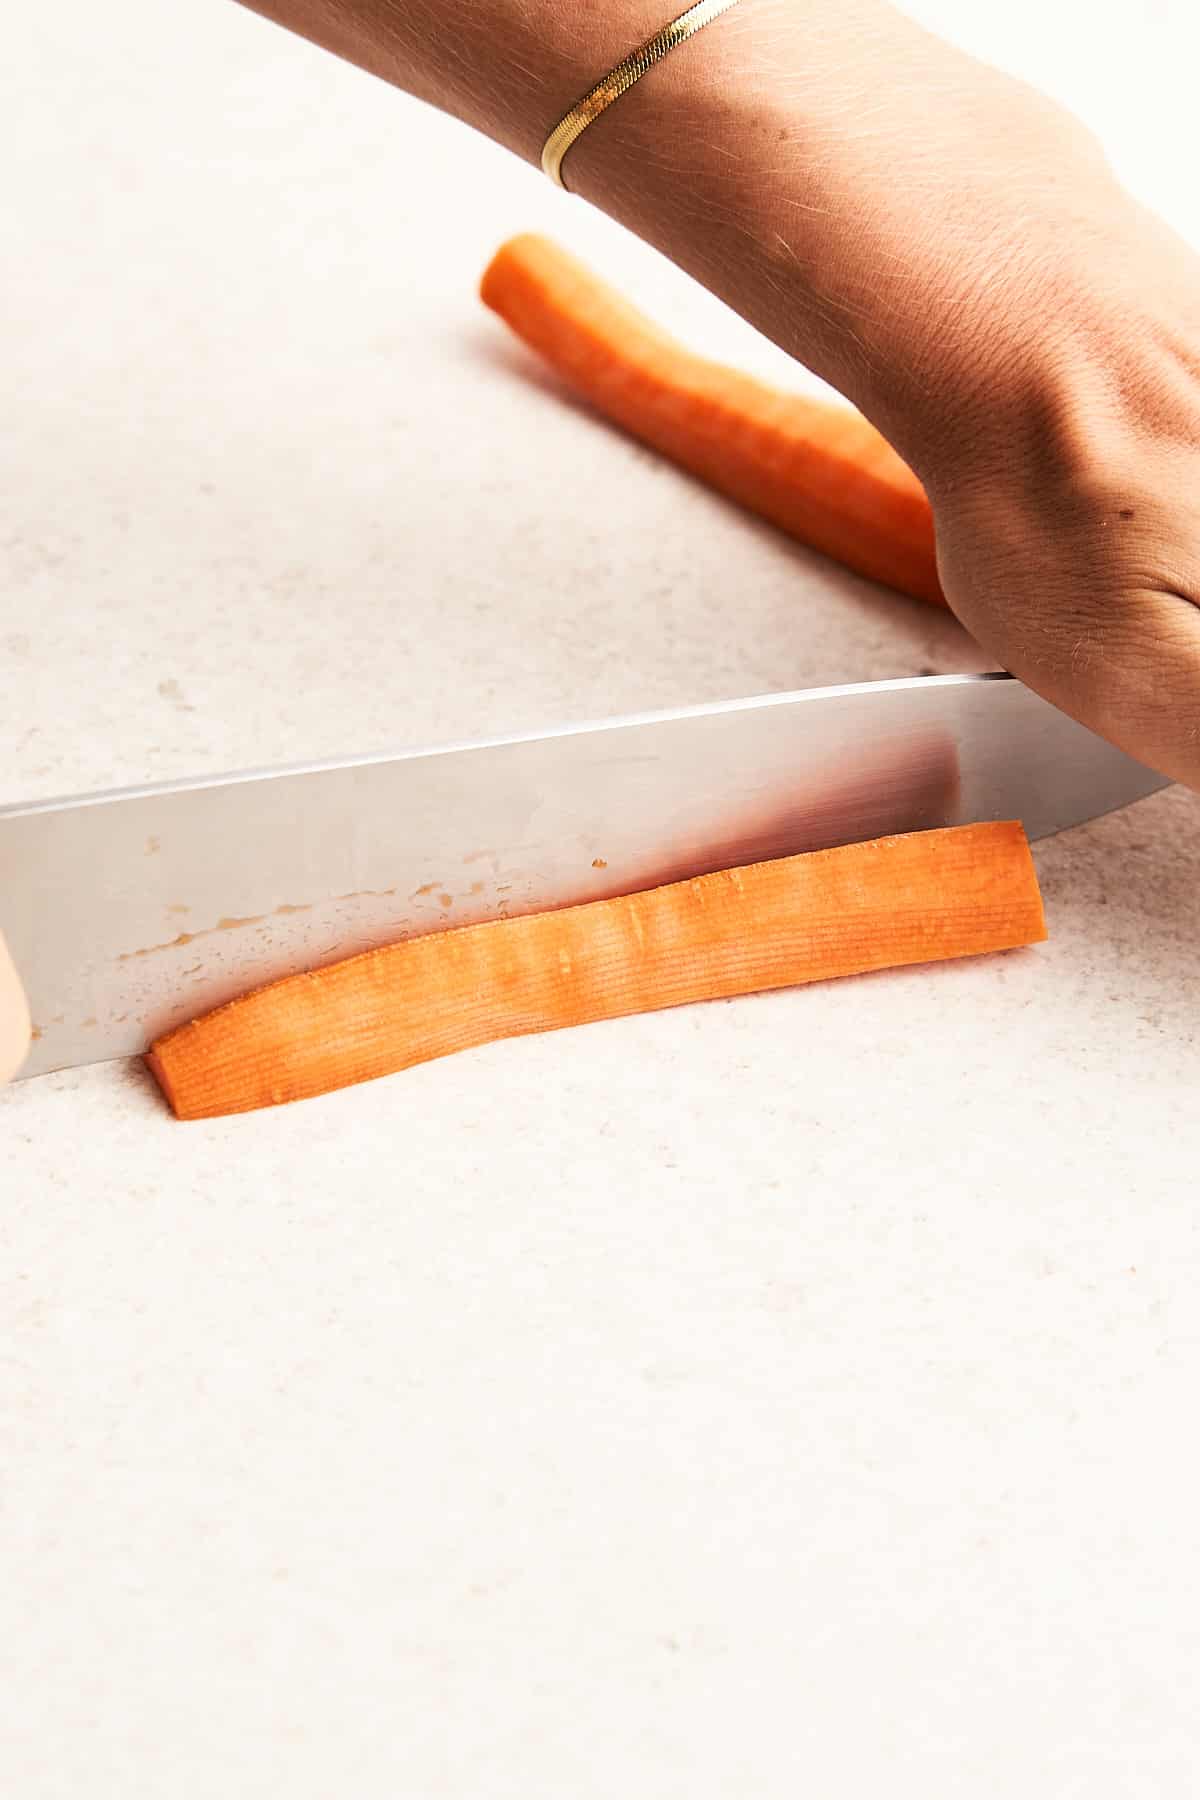 Cutting a carrot into quarters.